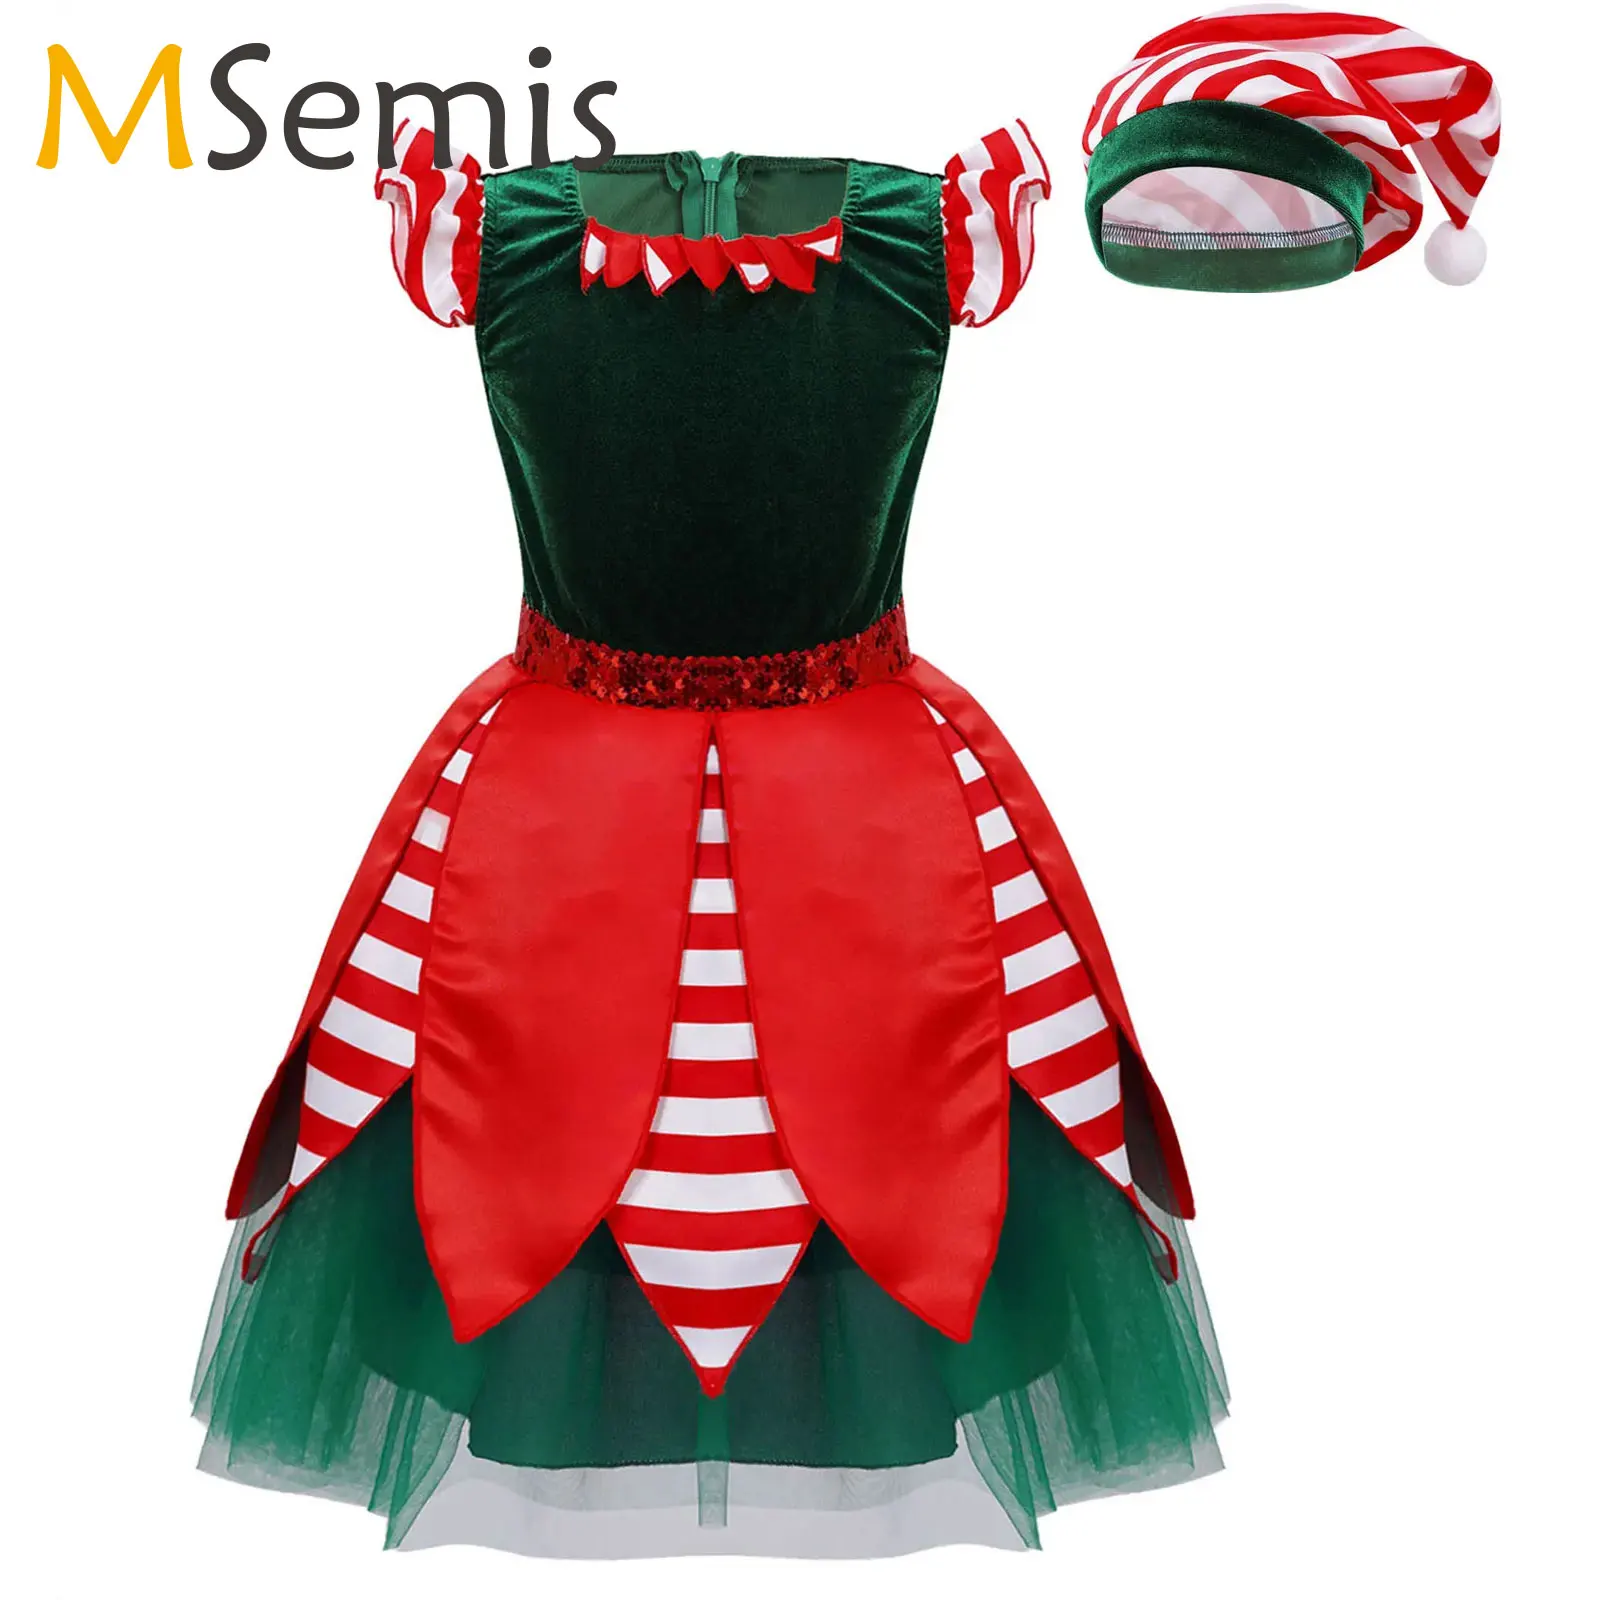 

Toddler Kids Girls Sequin Elf Costume Christmas Santas Clause Fancy Party Ballet Tutu Dress With Hat New Year Carnival Dress Up